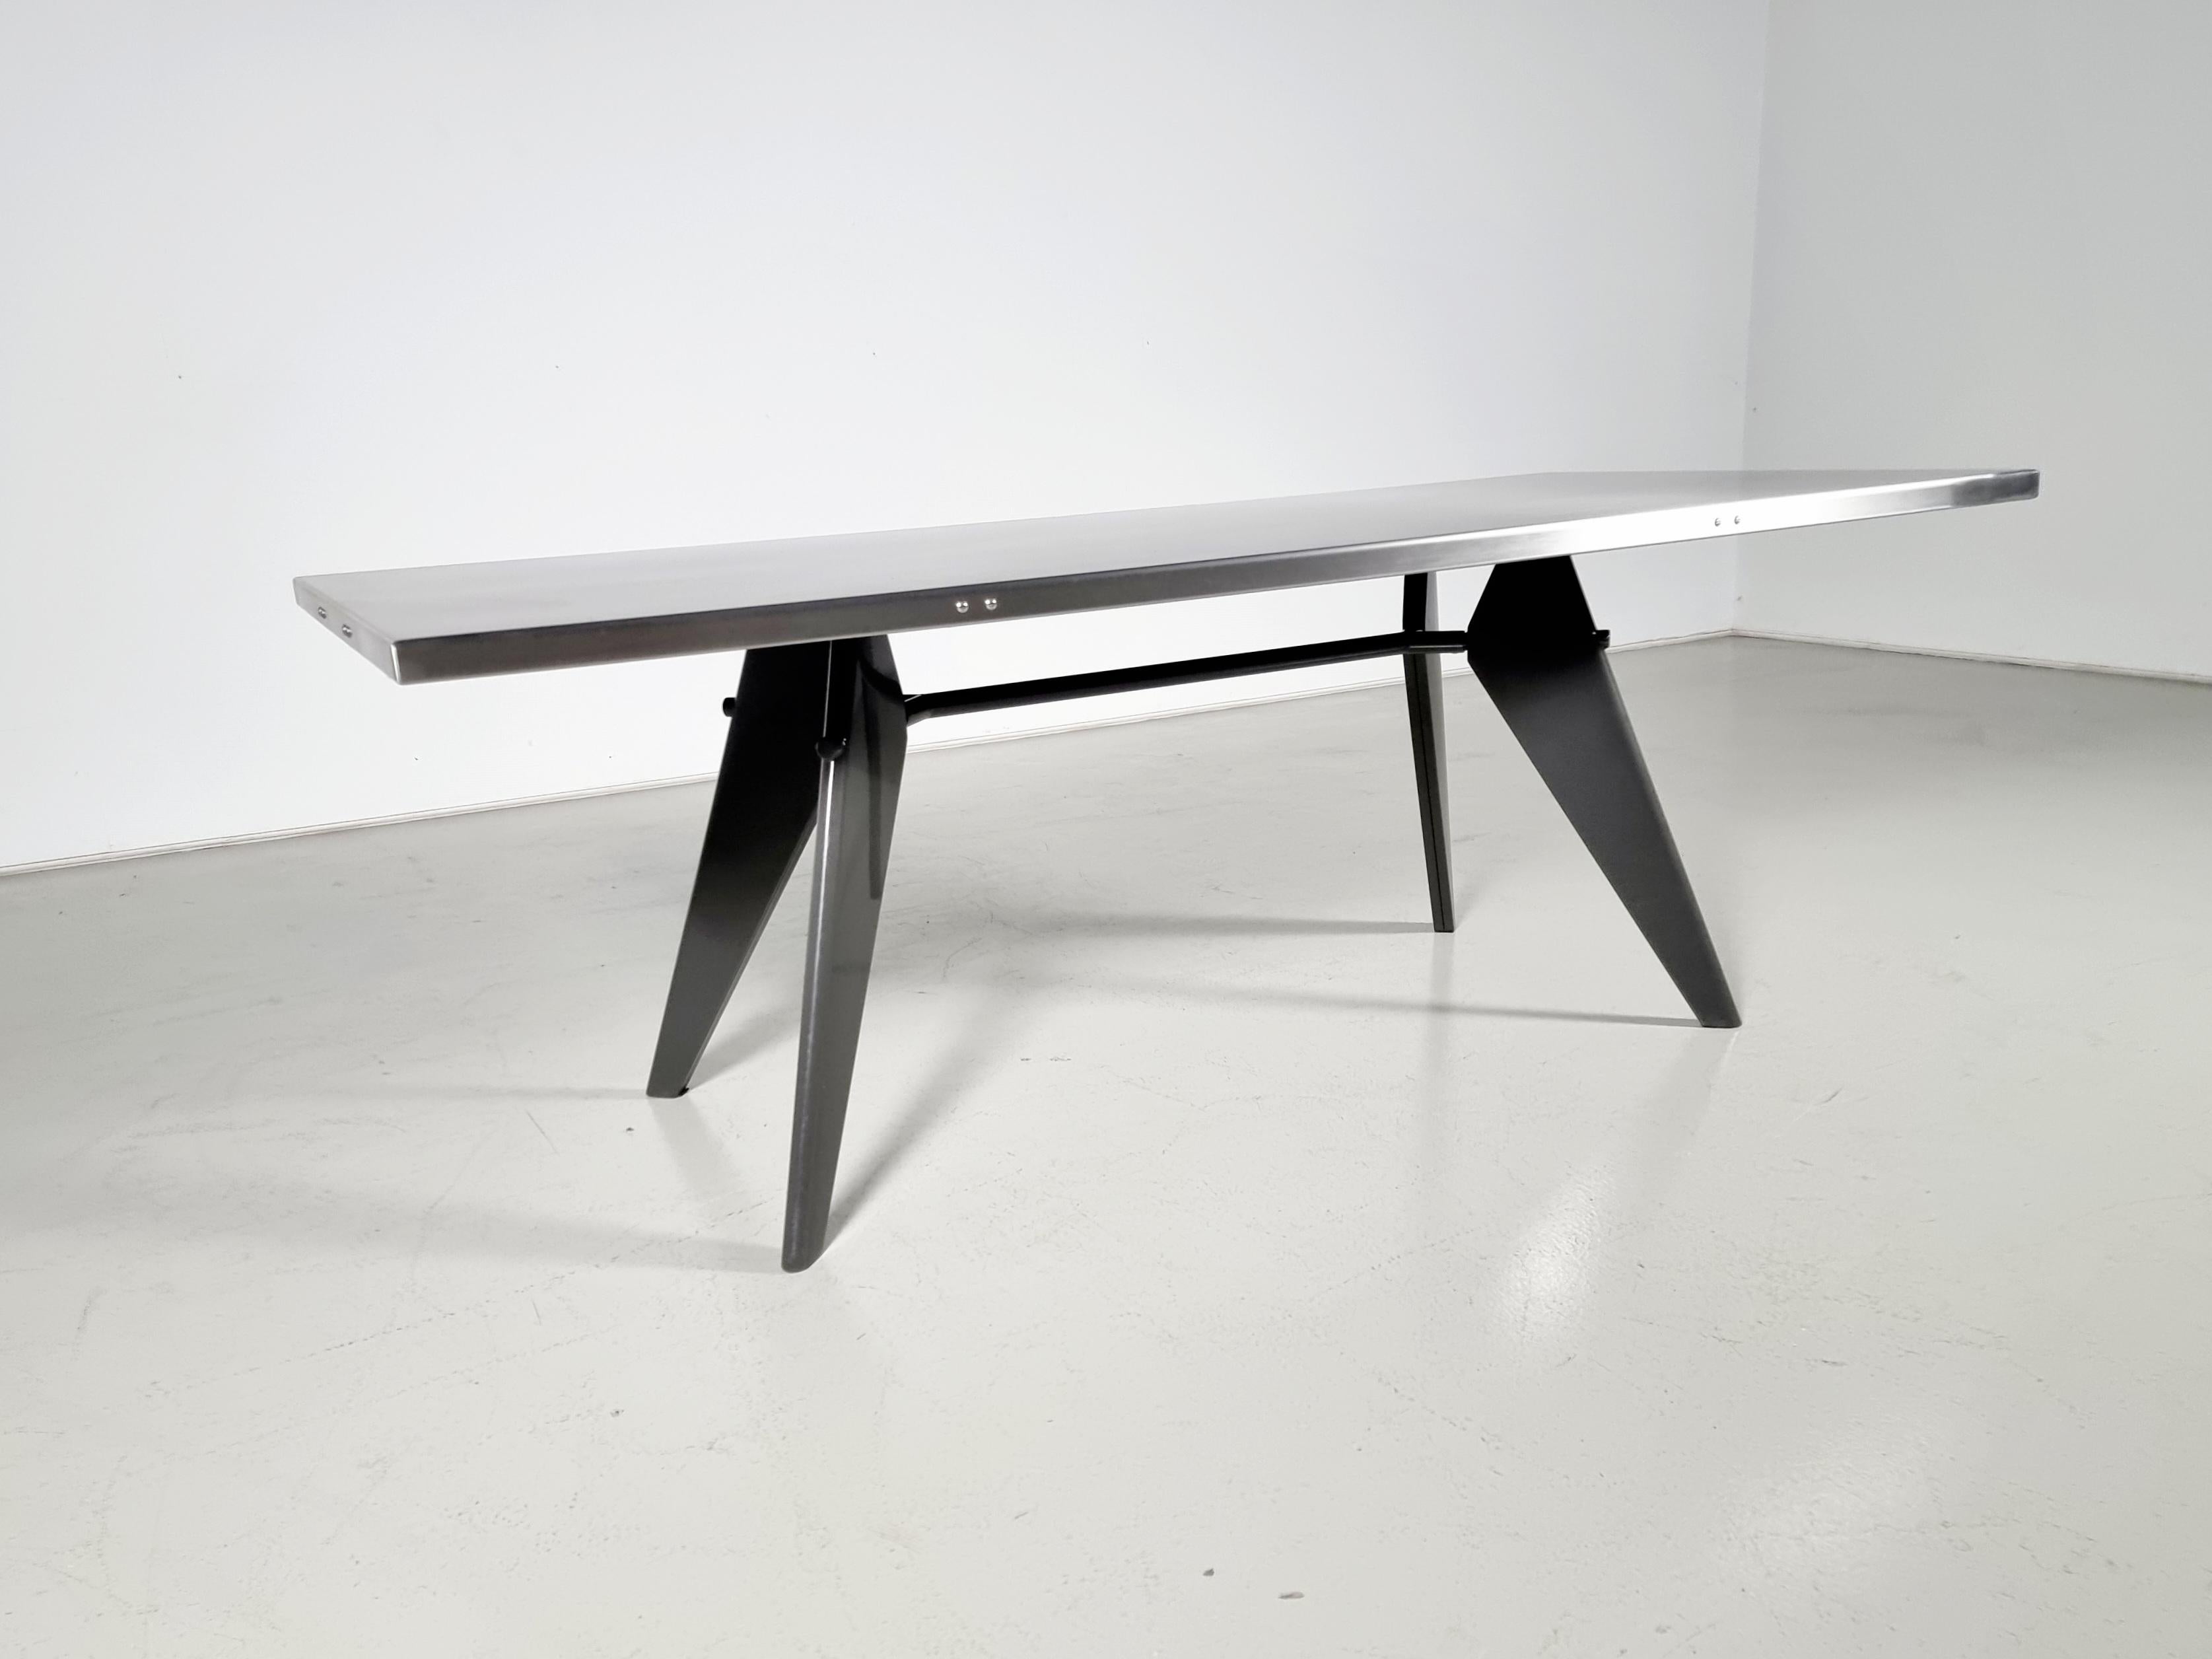 Steel Jean Prouve by G-Star Raw for Vitra S.A.M. Tropique Table with matching chairs For Sale